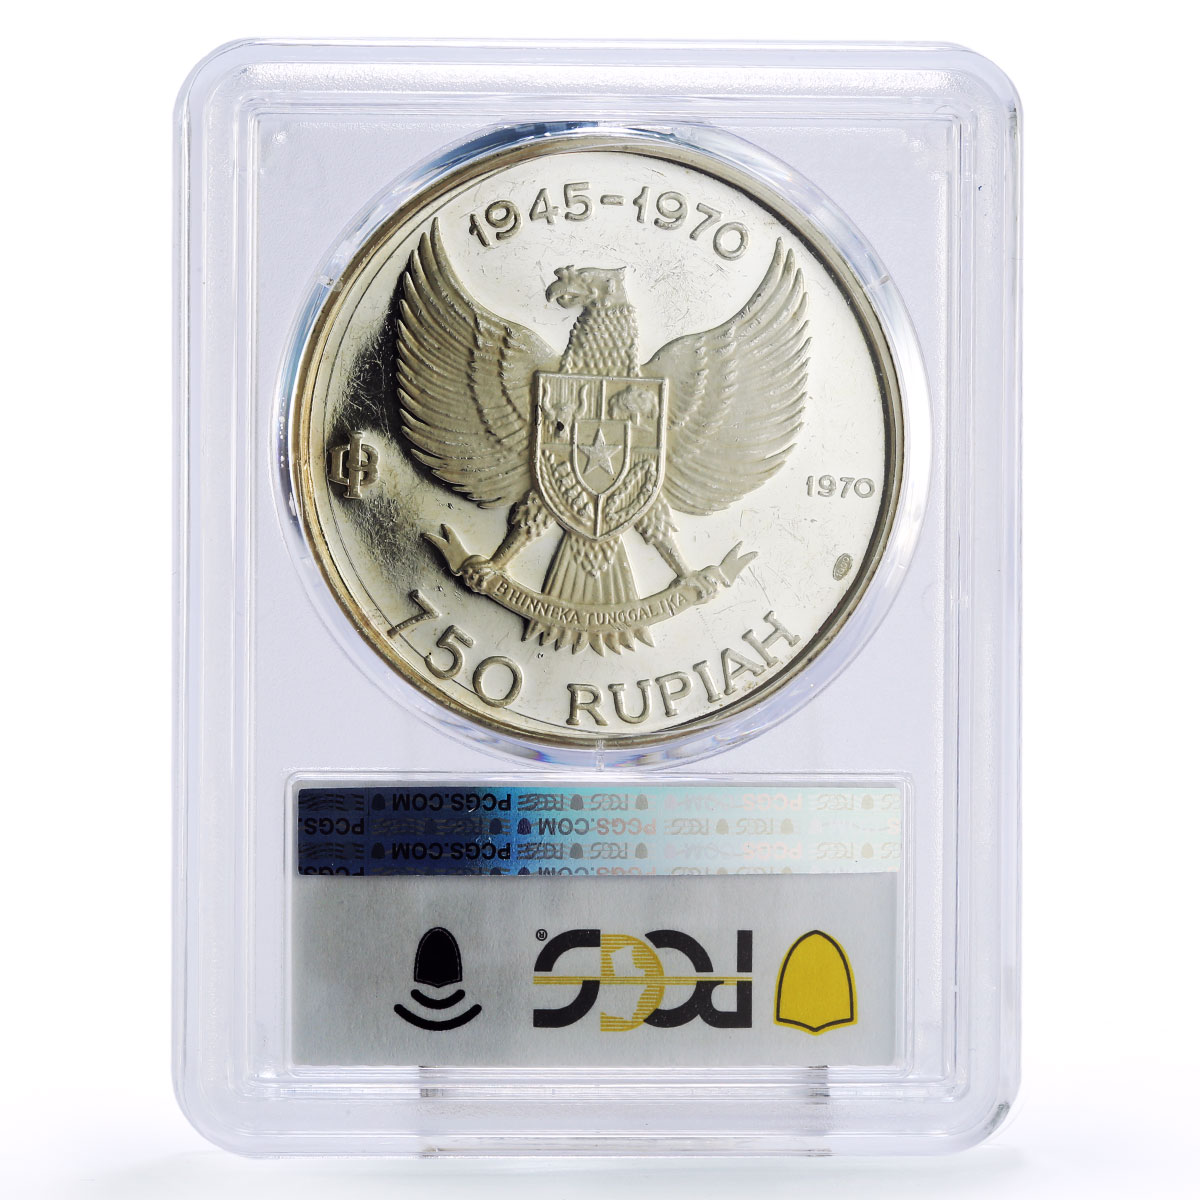 Indonesia 750 rupiah 25th Anniversary of Independece PR62 PCGS silver coin 1970